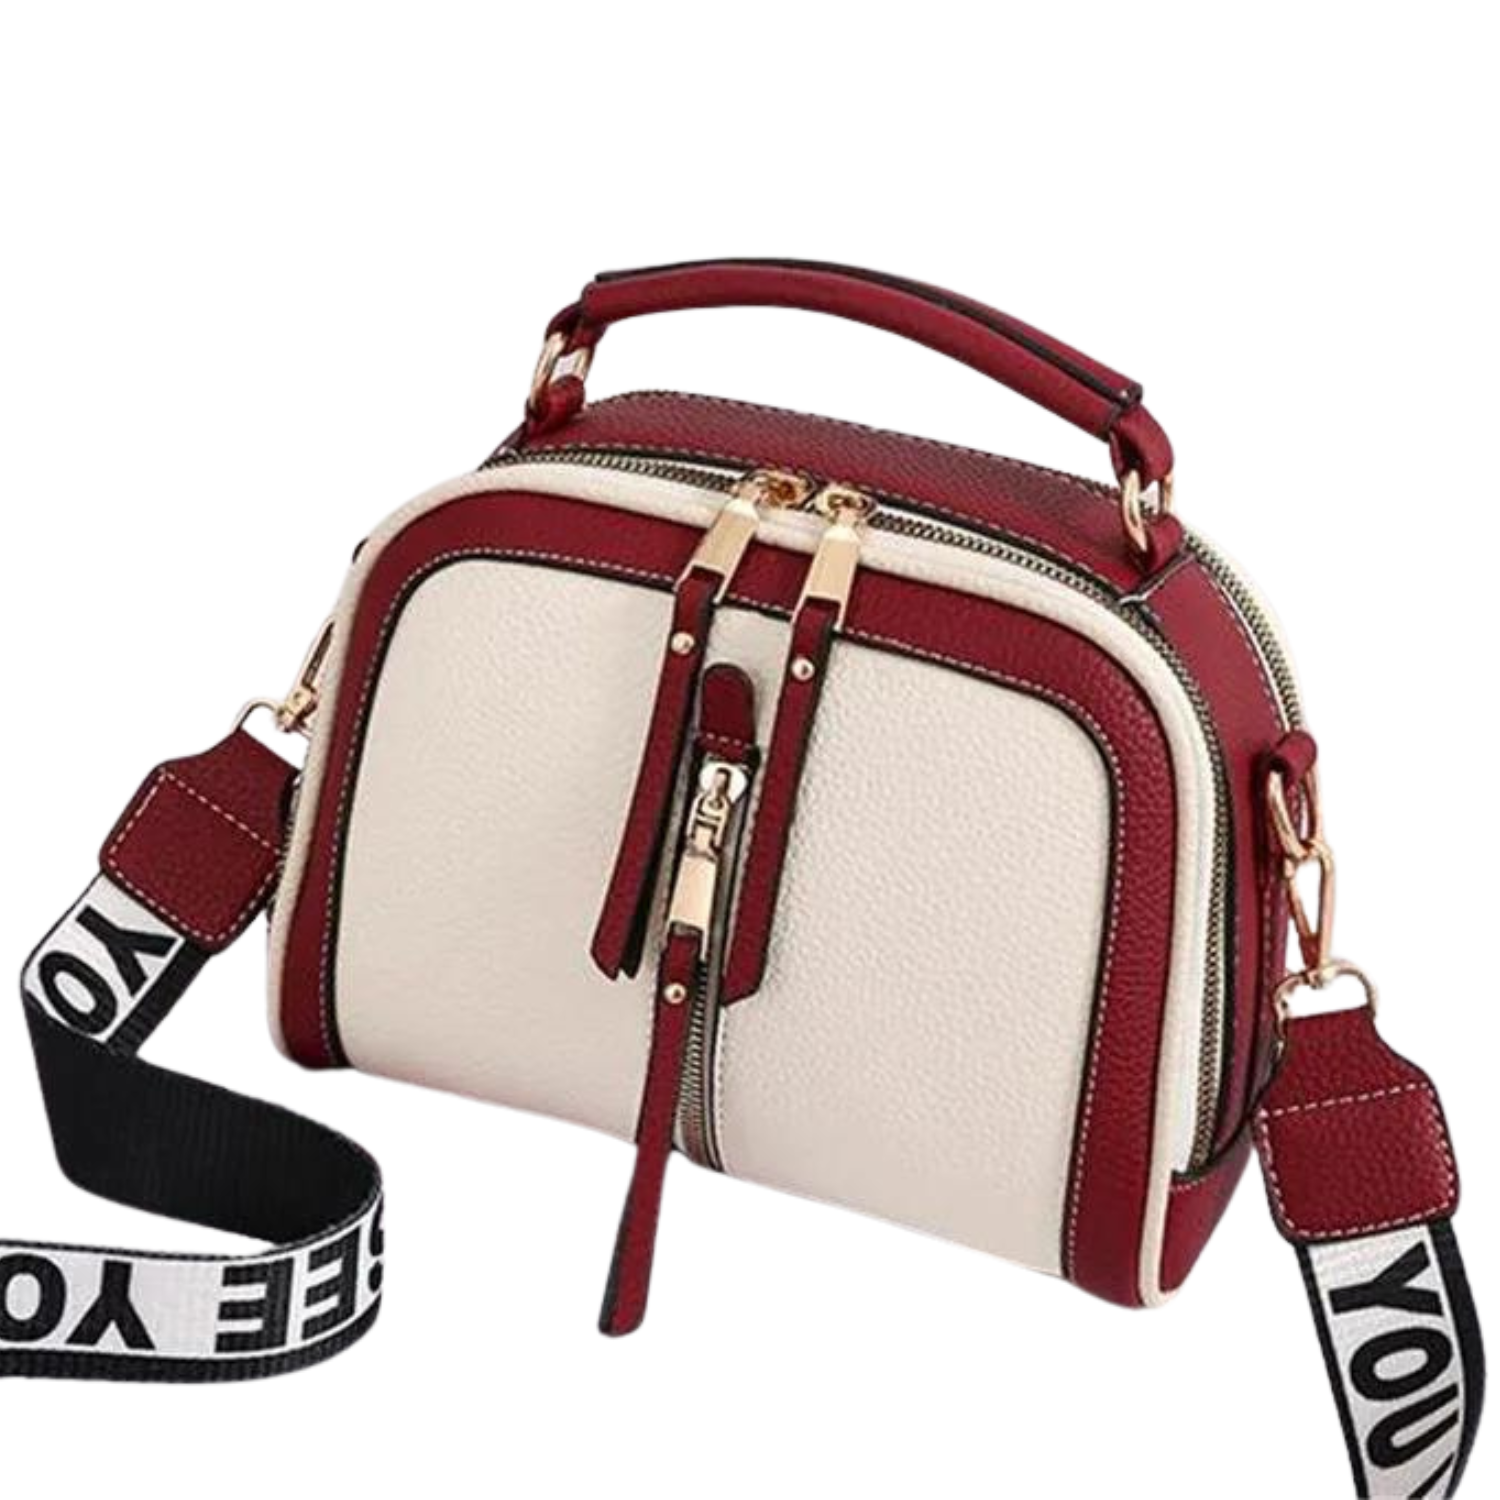 Modern Two-Tone Crossbody Bag with Wide Strap